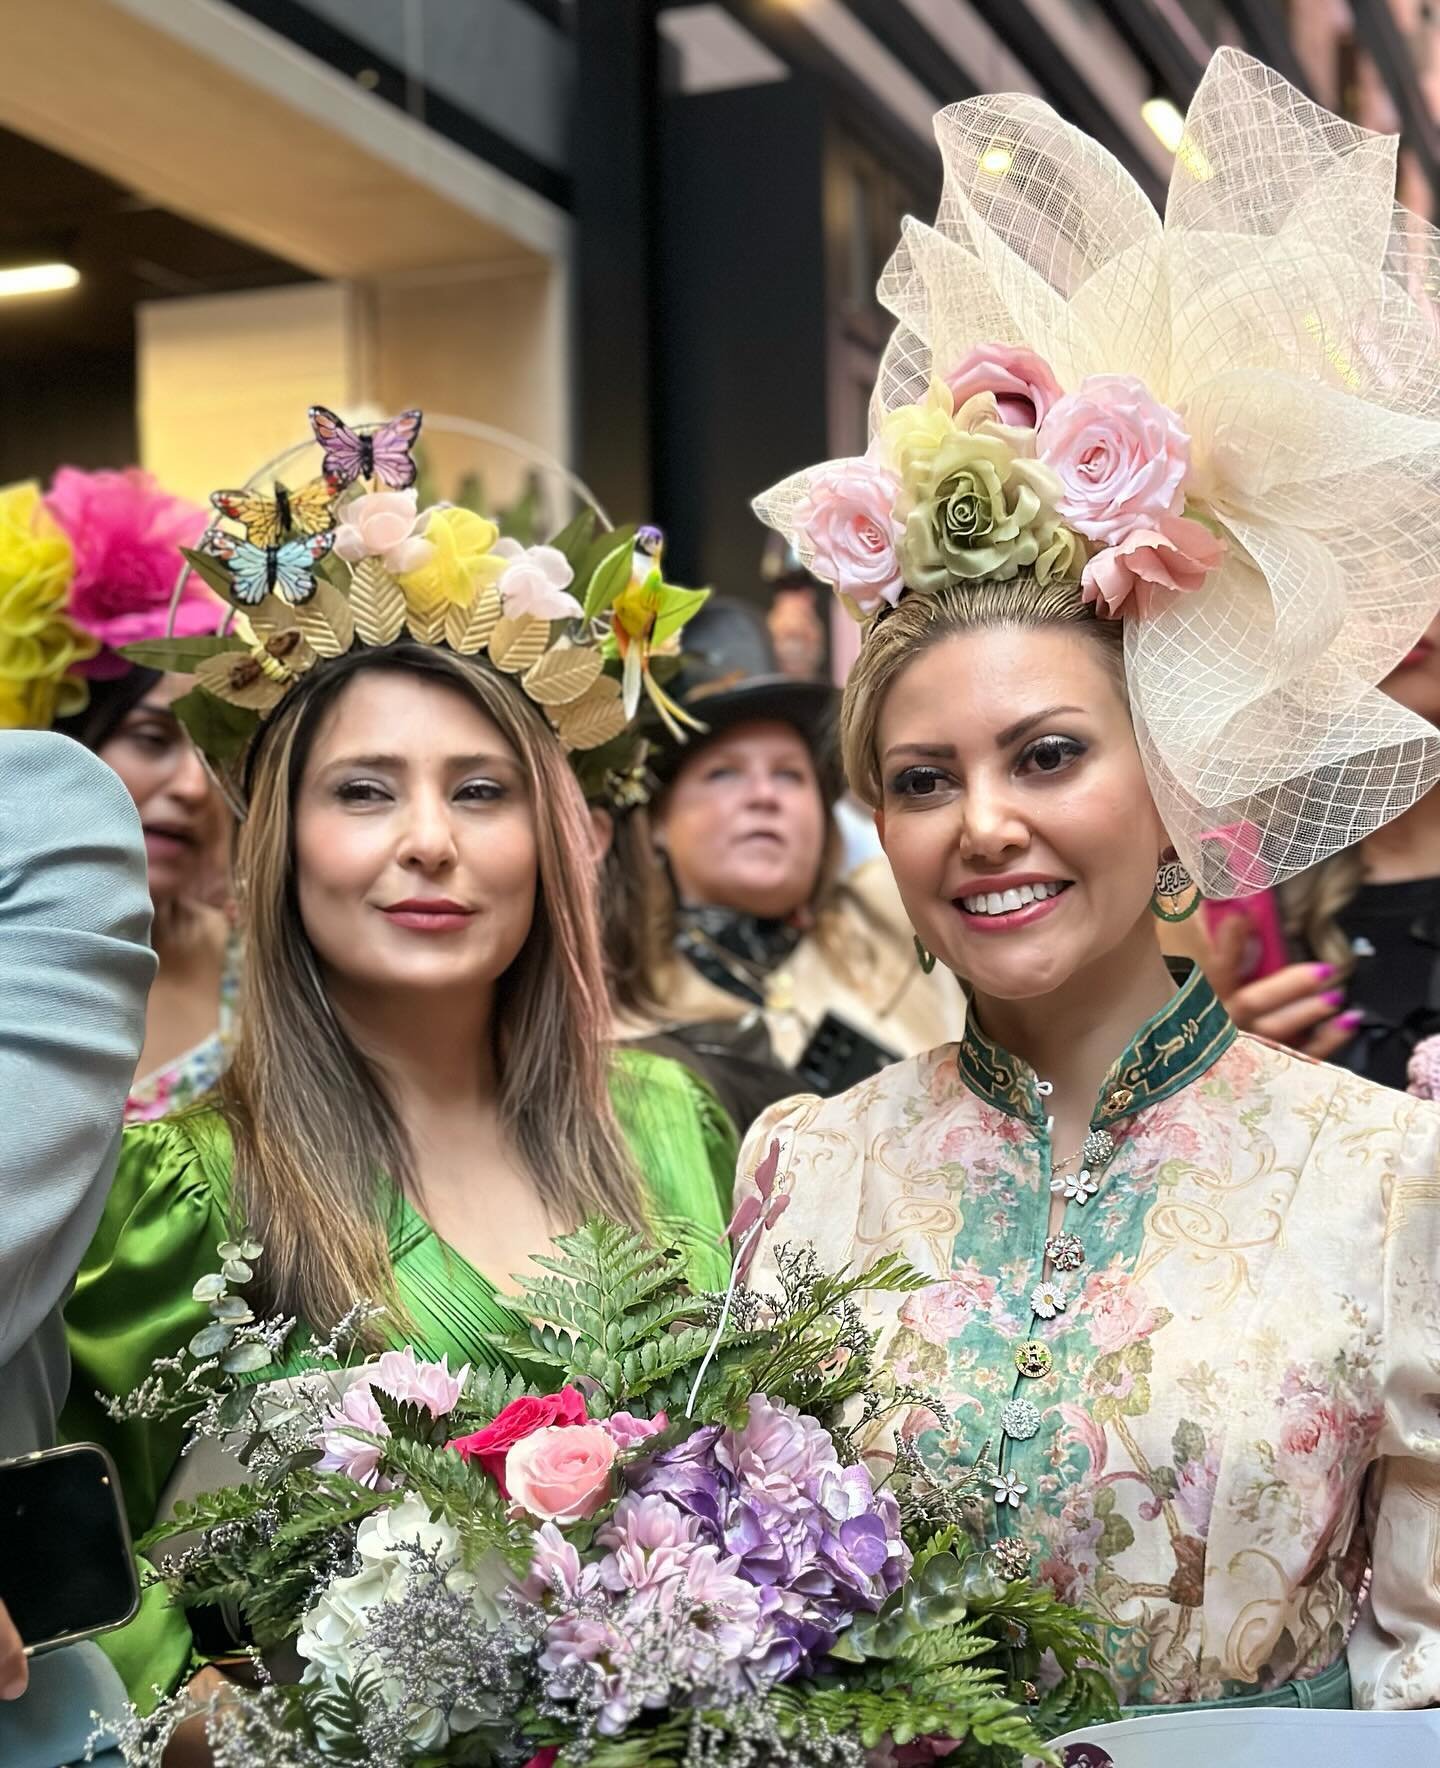 Check out these headpieces designed and created by our member @ellie_jian_millinery, which were worn at a Derby Party in Boston 🐎🌹

#derbyhat #kyderby #derby150 #hatstyle #bestsressedlady #custommillinery #runfortheroses #racingfashion @milliners_g